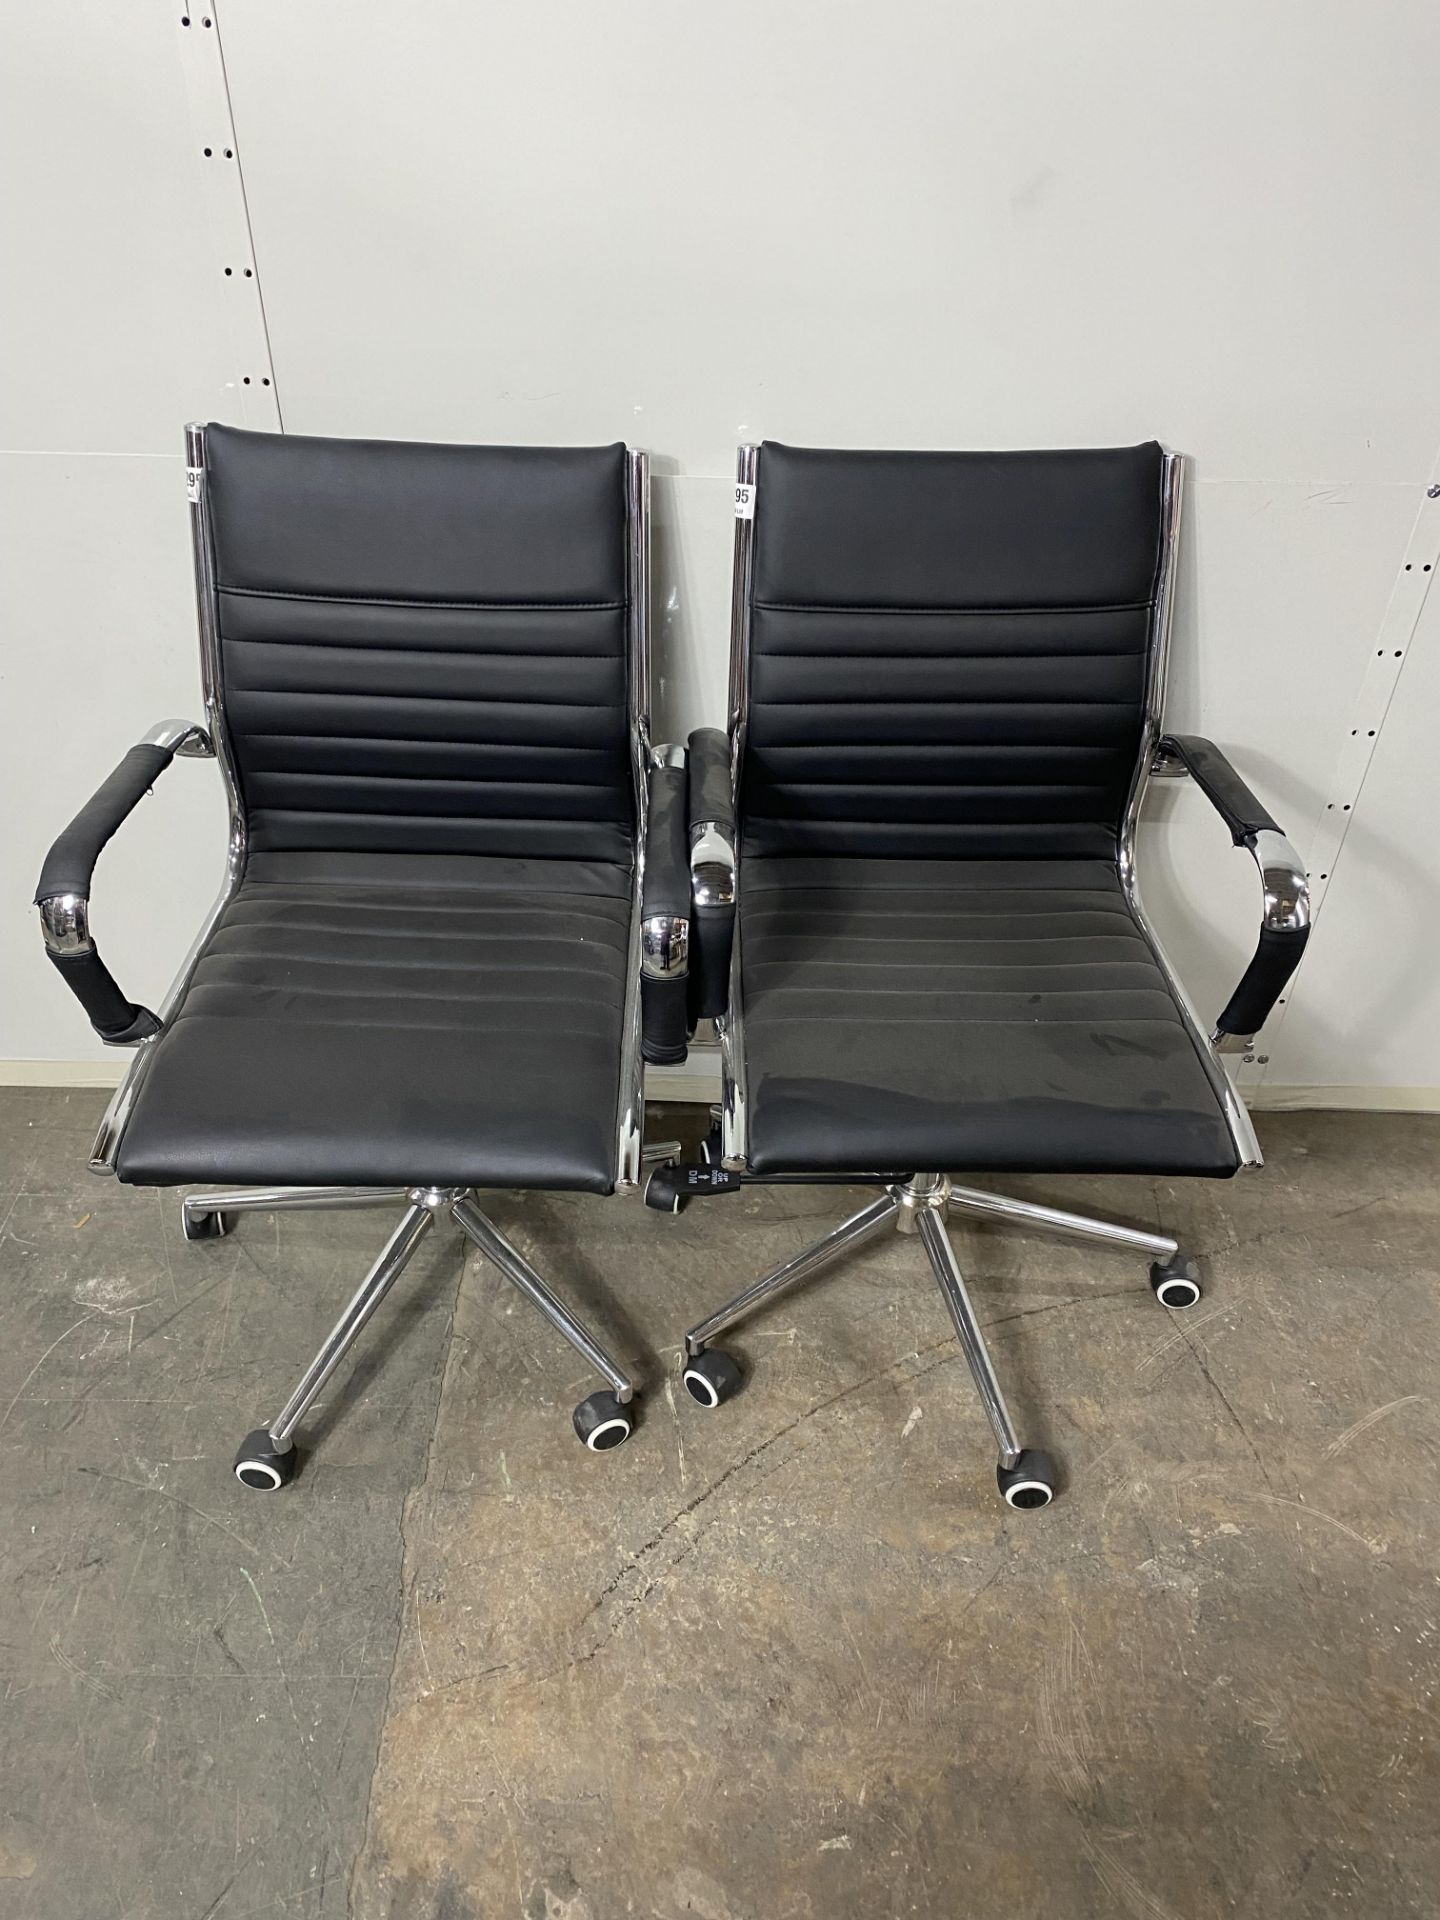 6 x Black Office Chairs - Image 3 of 6